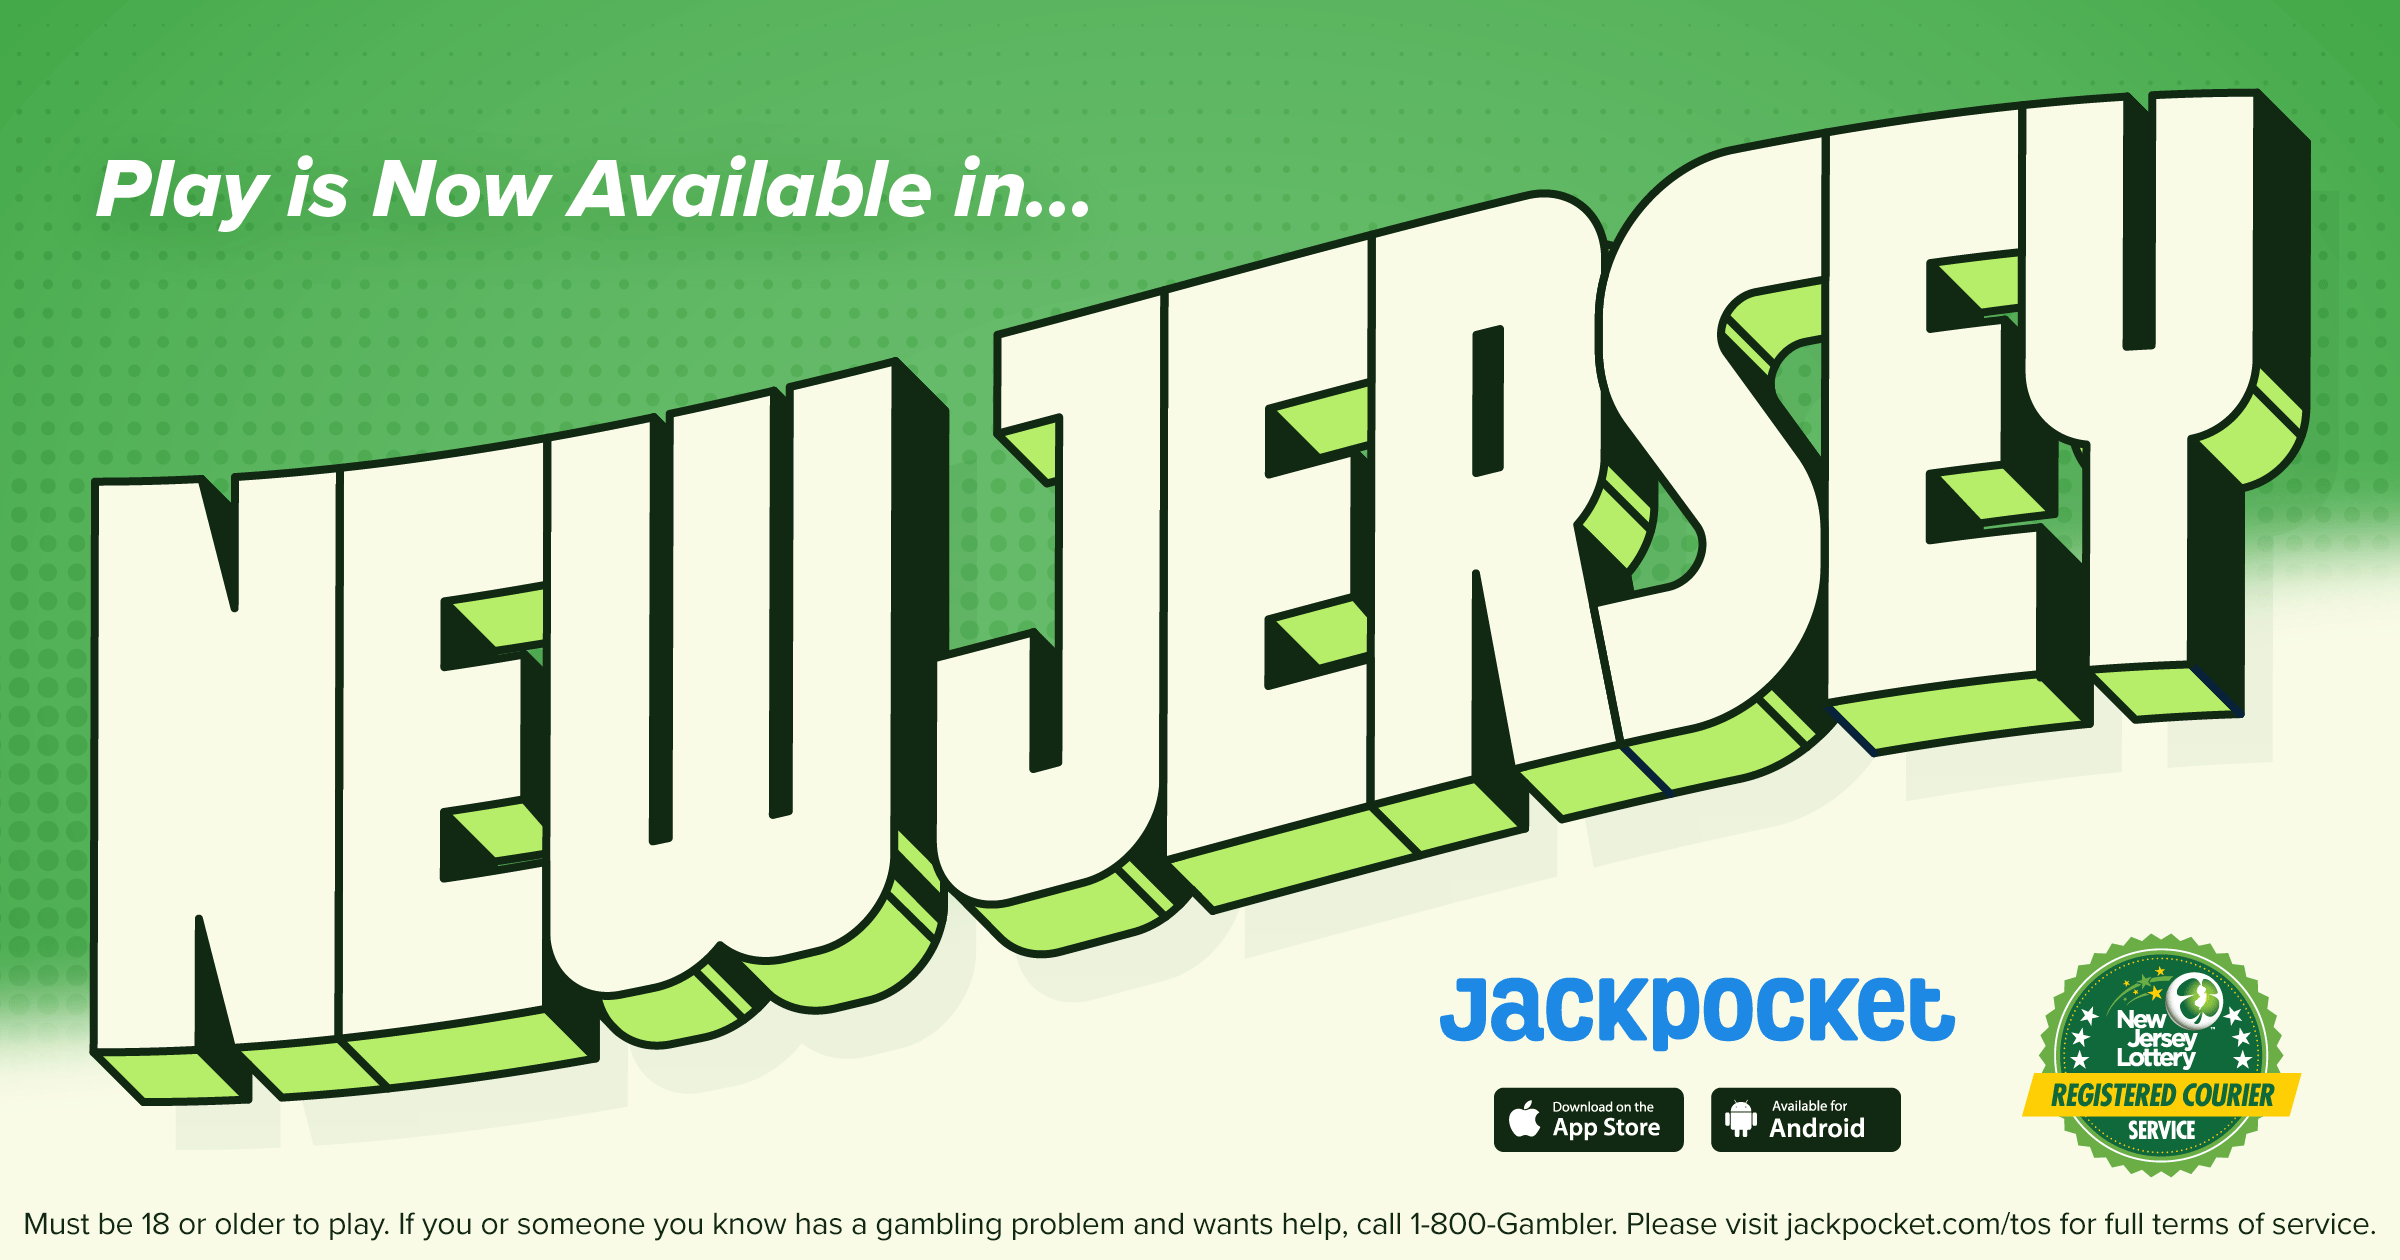 Ready To Play Nj Jackpocket Lottery App Now Available In The